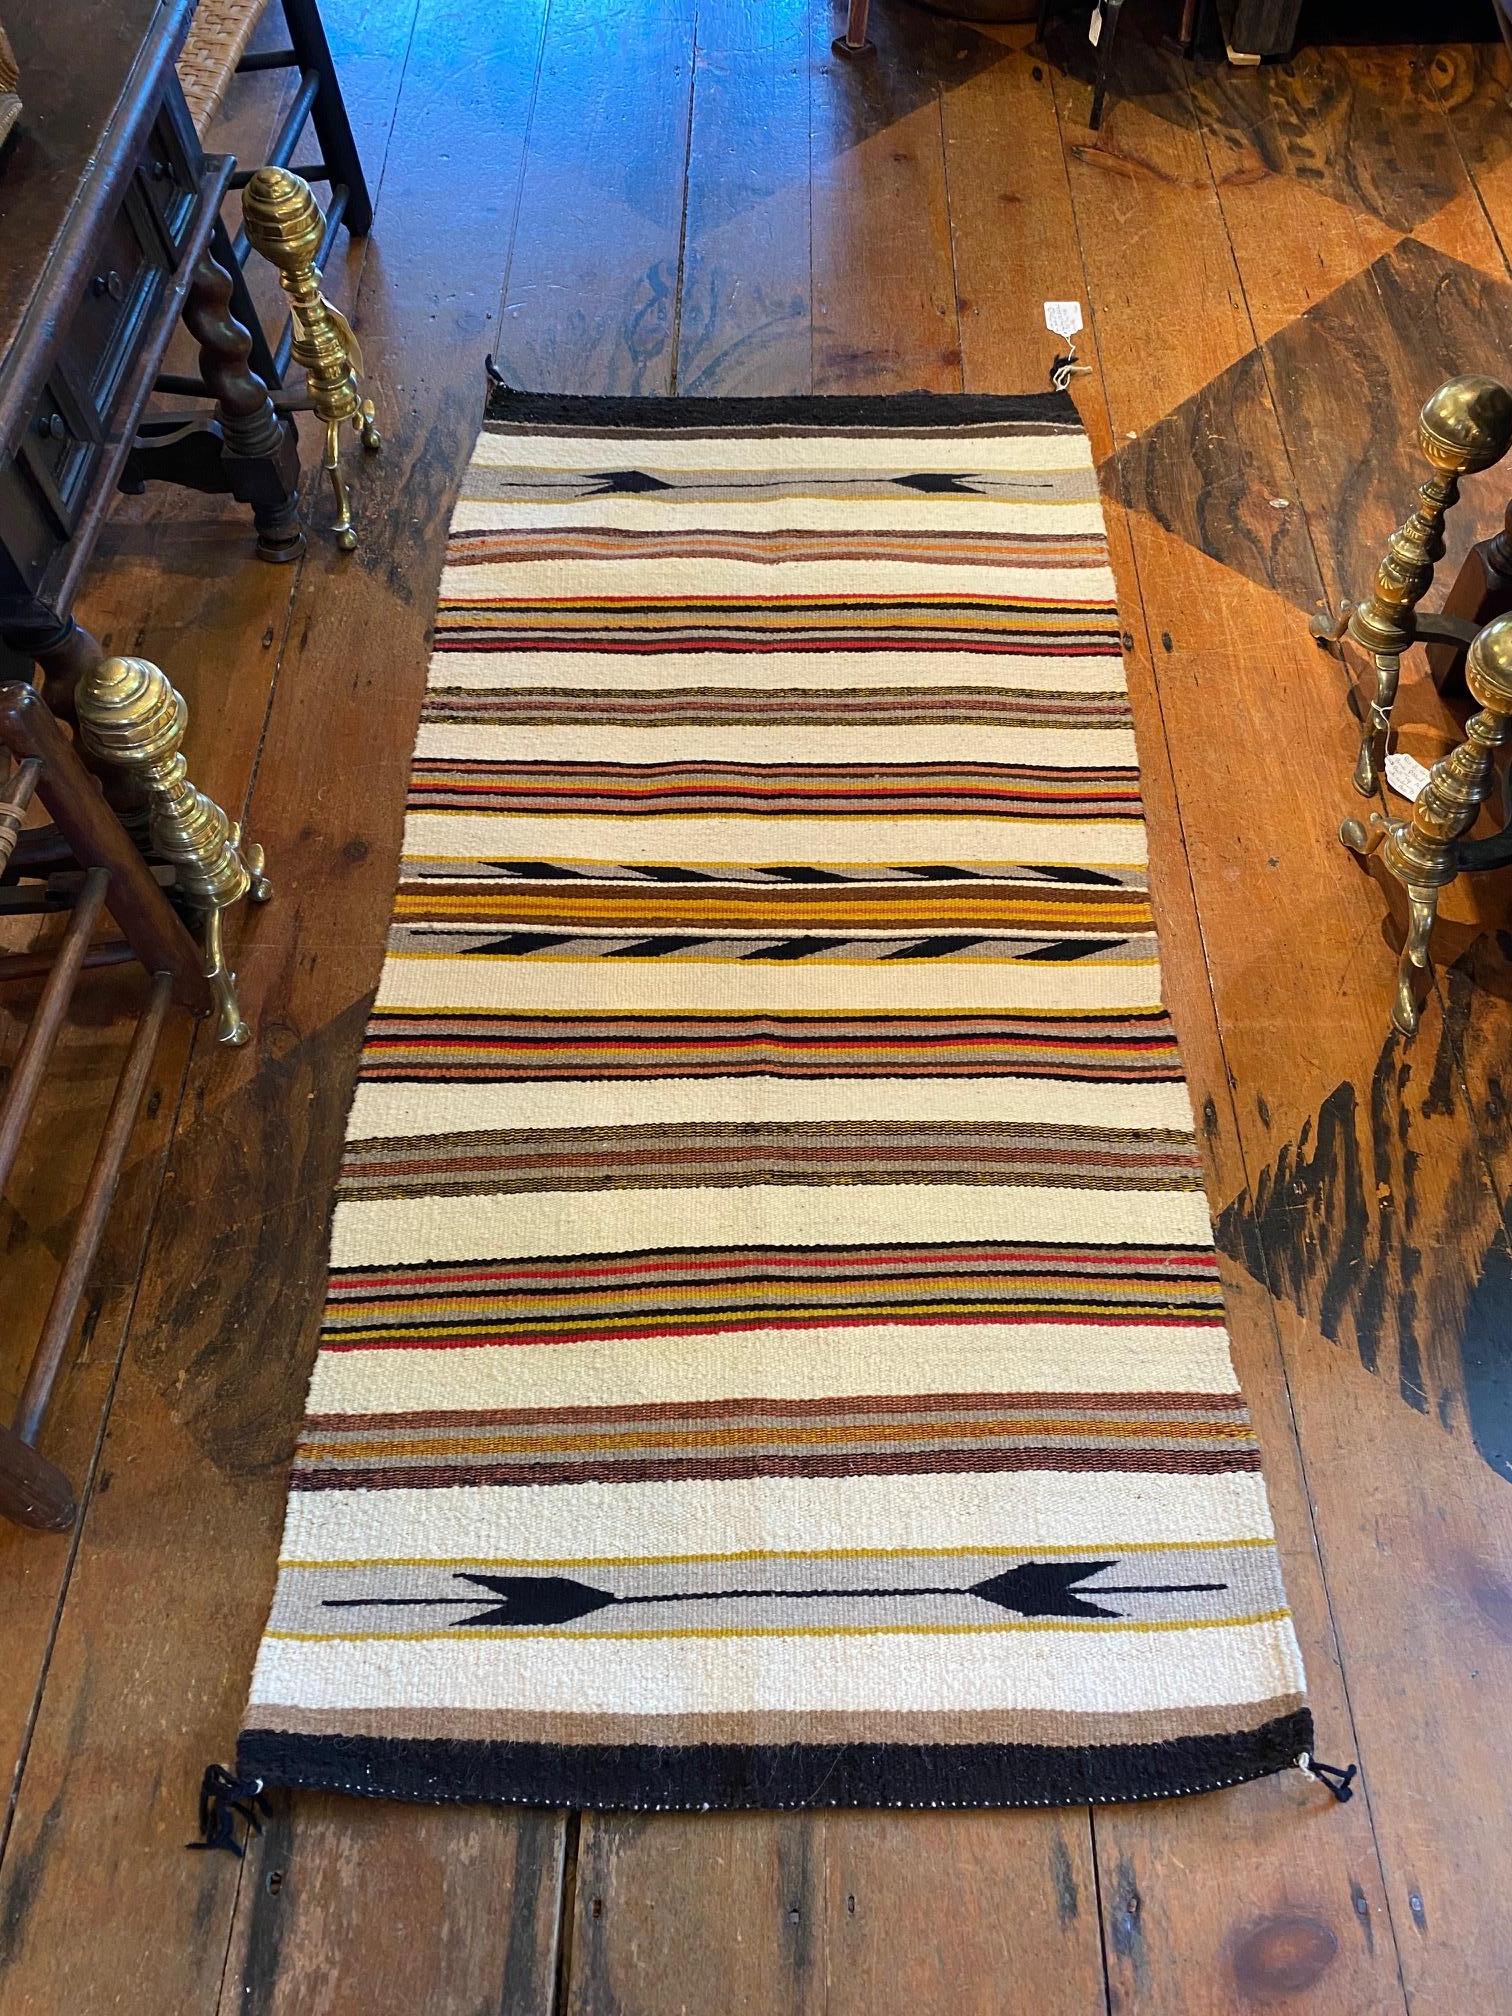 Antique Navajo rug, circa 1920s, from the estate of the late Dan Fogelberg, Mountain Bird Ranch in Colorado. The hand loomed woolen rug with arrow and stripe pattern has a lovely soft palette and is in excellent condition.

Measures: 64 in L x